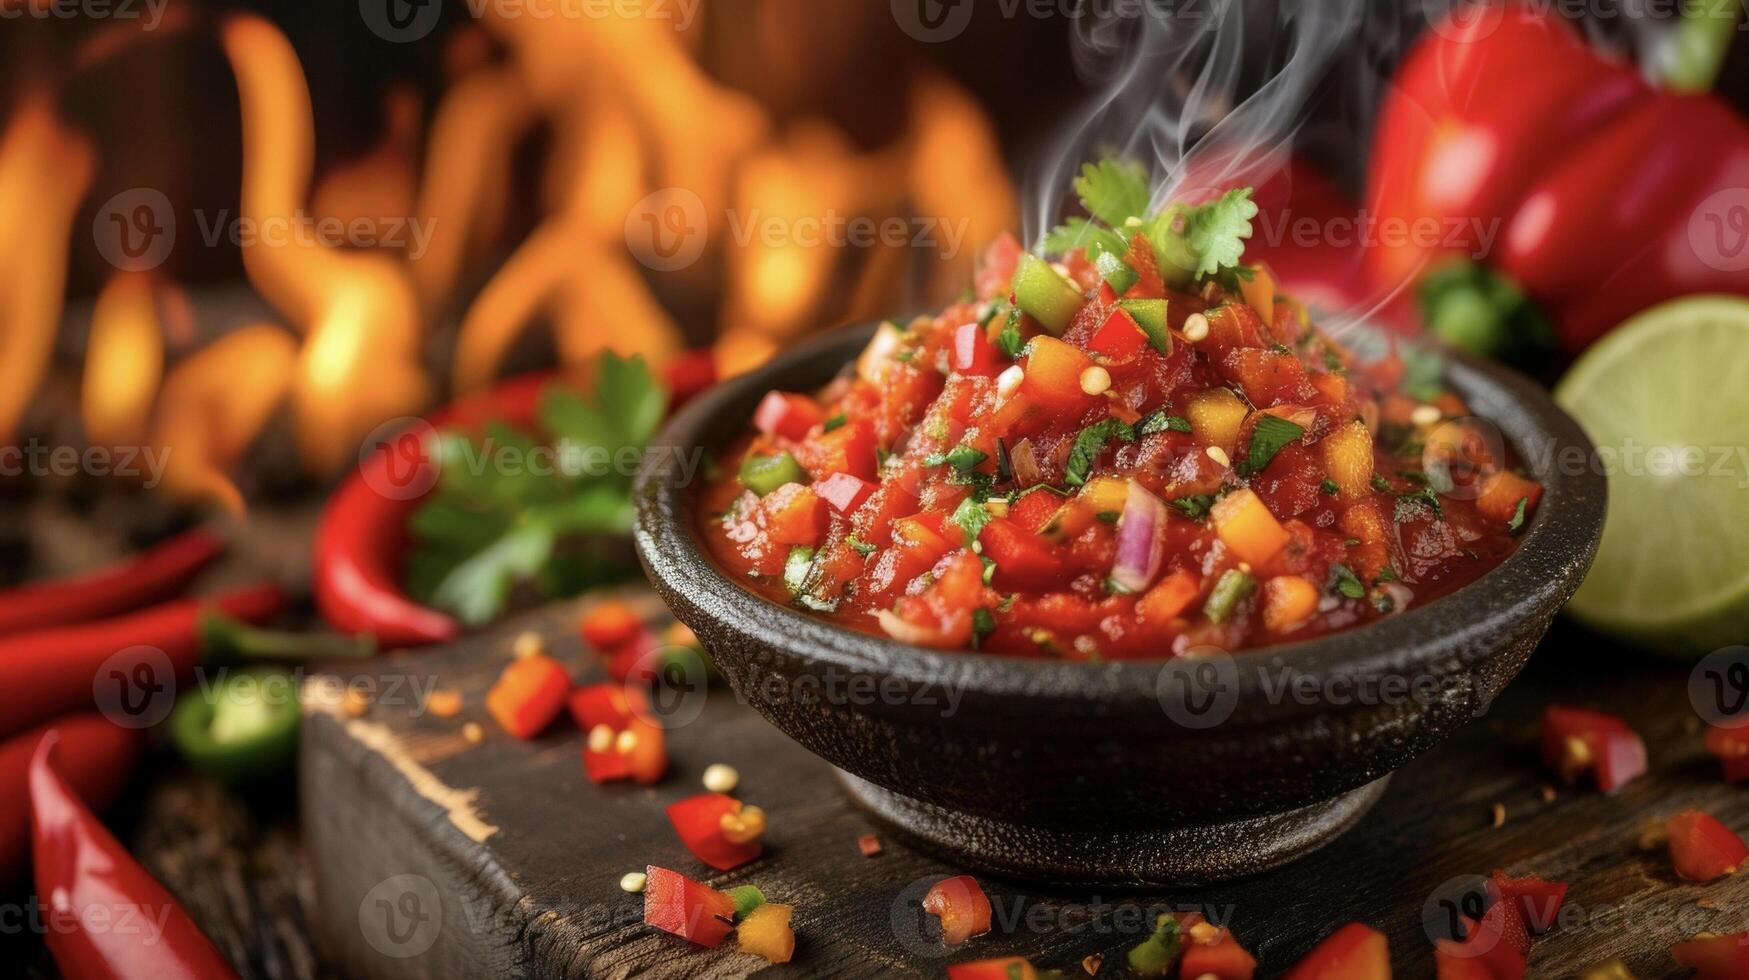 Get ready to feel the burn with this blazing salsa featuring fiery habanero peppers and flames in the background. A bold and delicious choice for e lovers photo